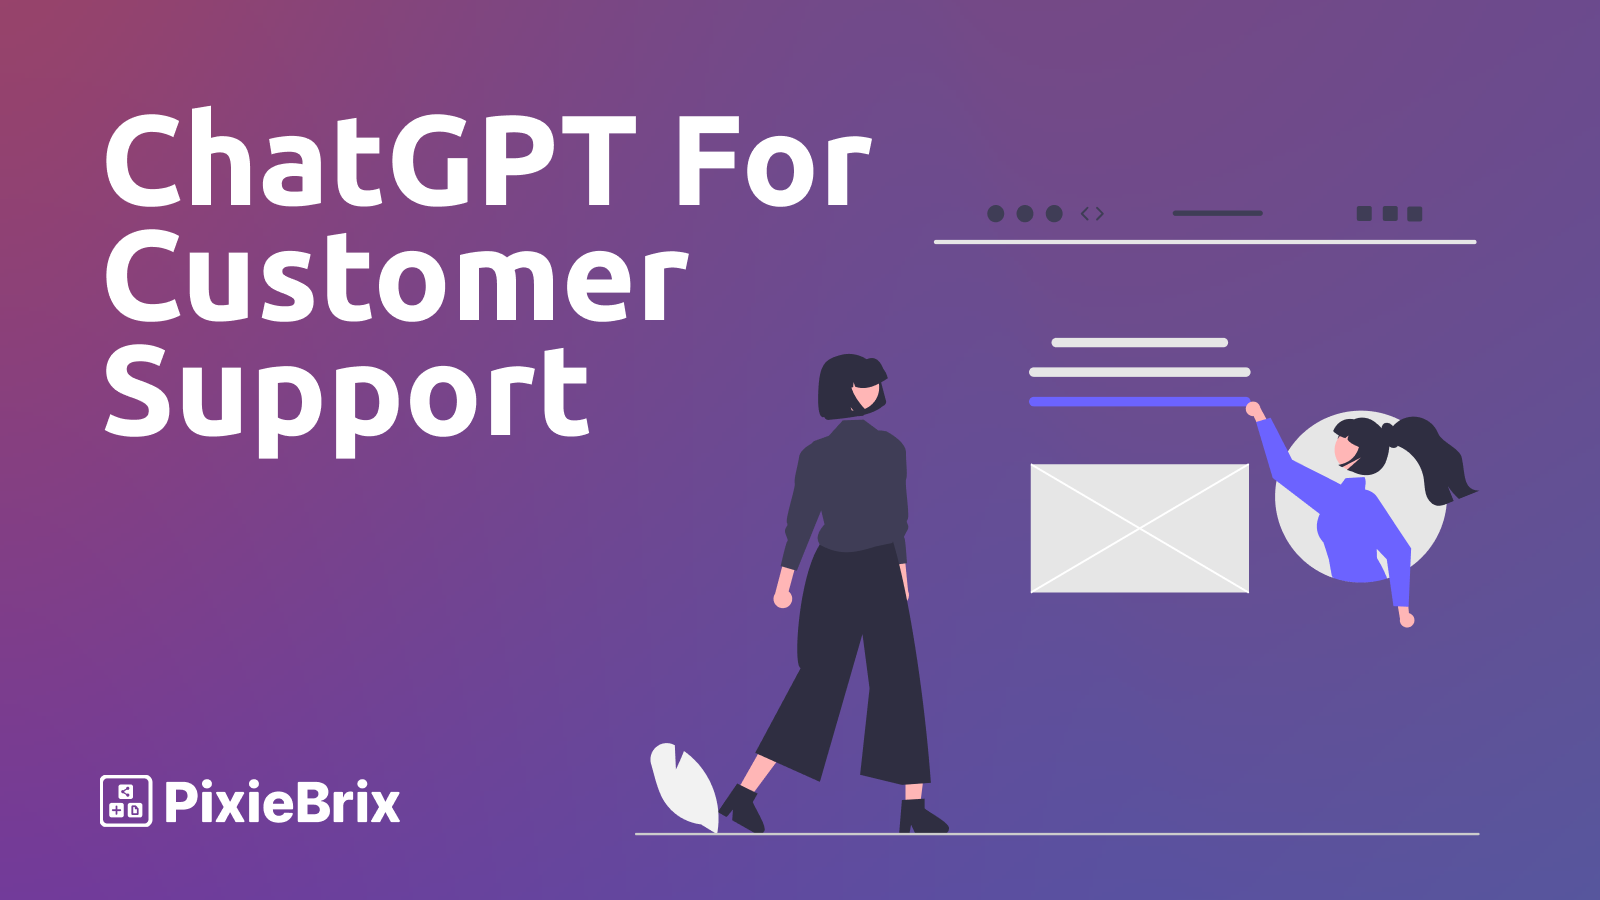 15 Ways You Can Use ChatGPT for Customer Support